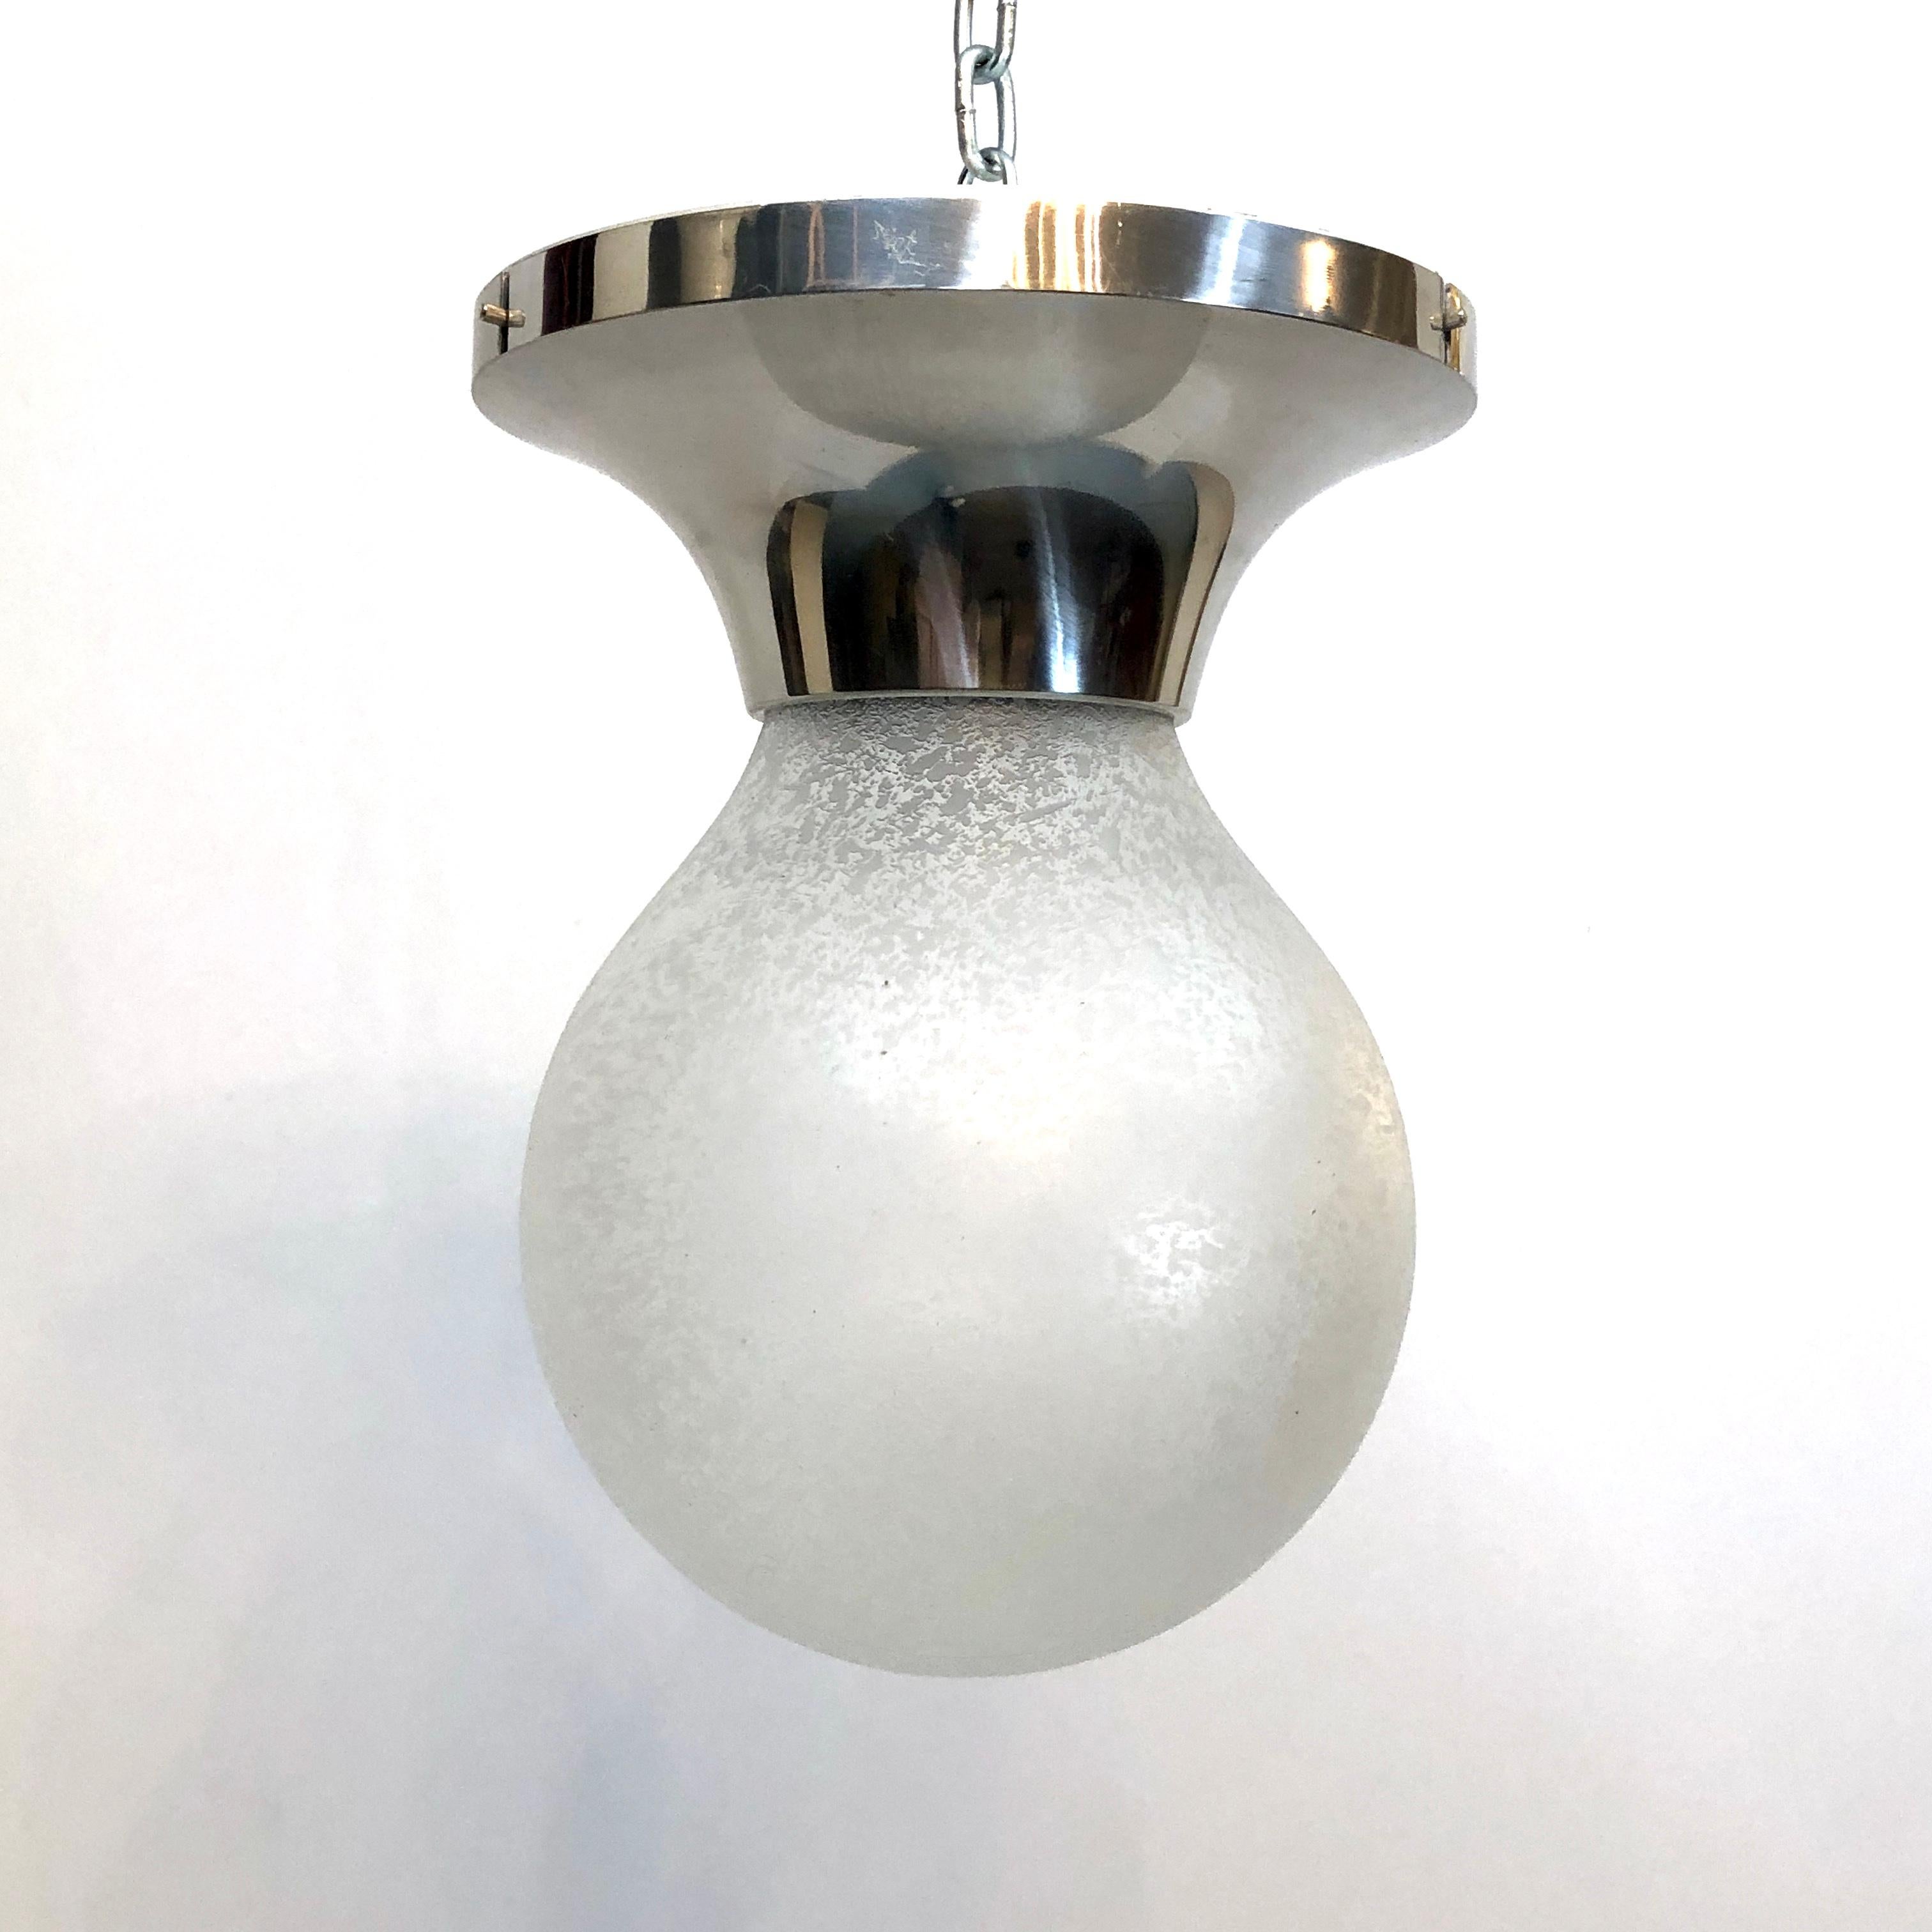 Vintage condition never used for this ceiling lamp produced in Italy by Stilux Milano. Made from polished aluminum and frosted glass. Original tag. Full working with EU standard, adaptable on demand for USA standard.